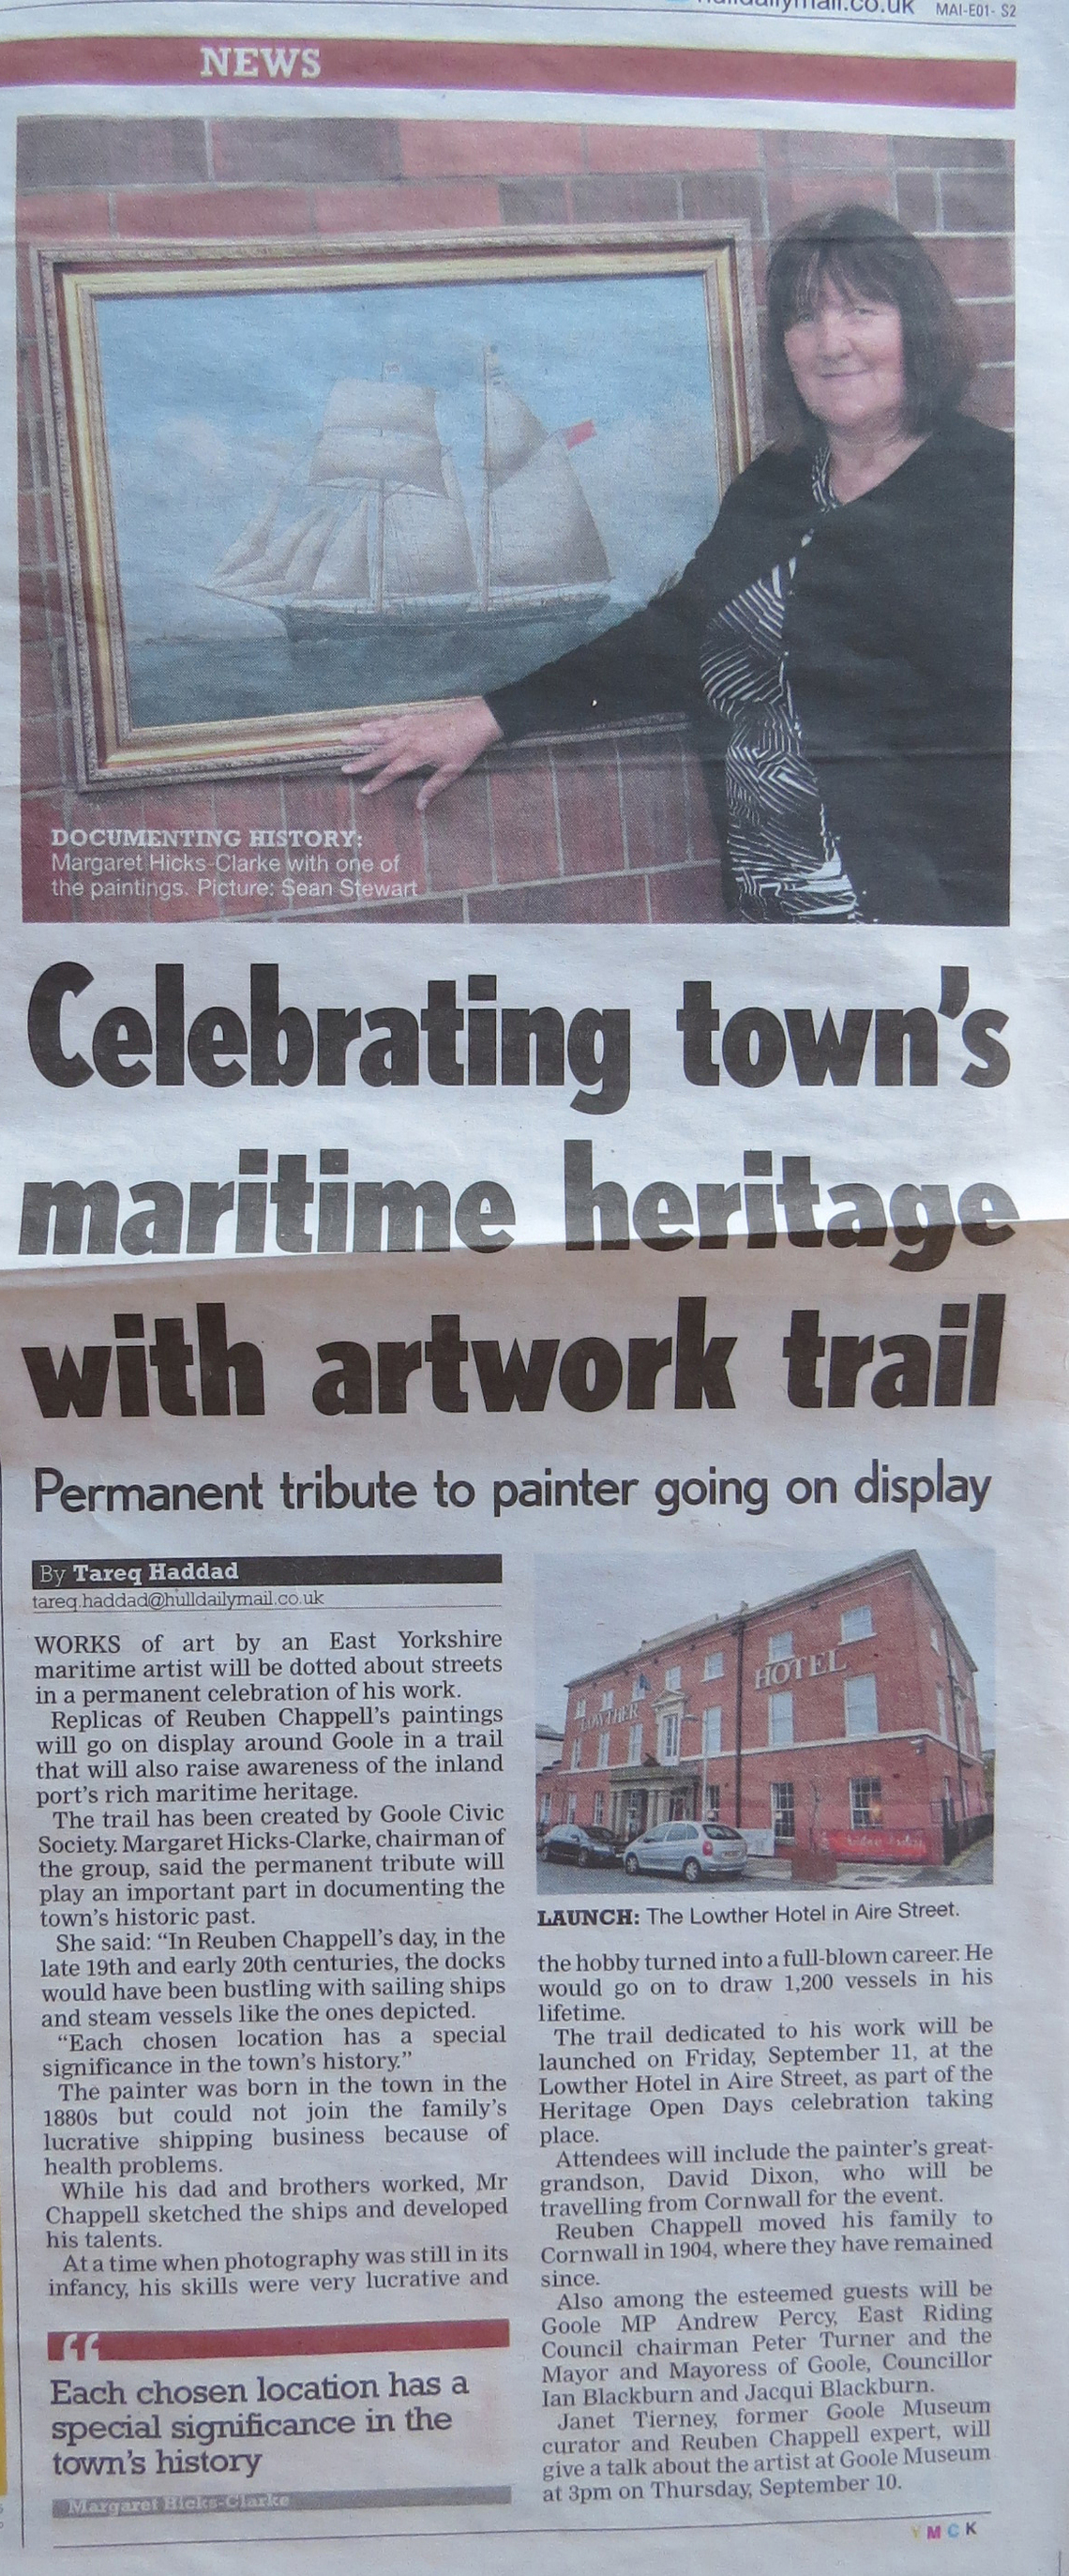 Goole Civic Society set to launch Reuben Chappell art trail in port town